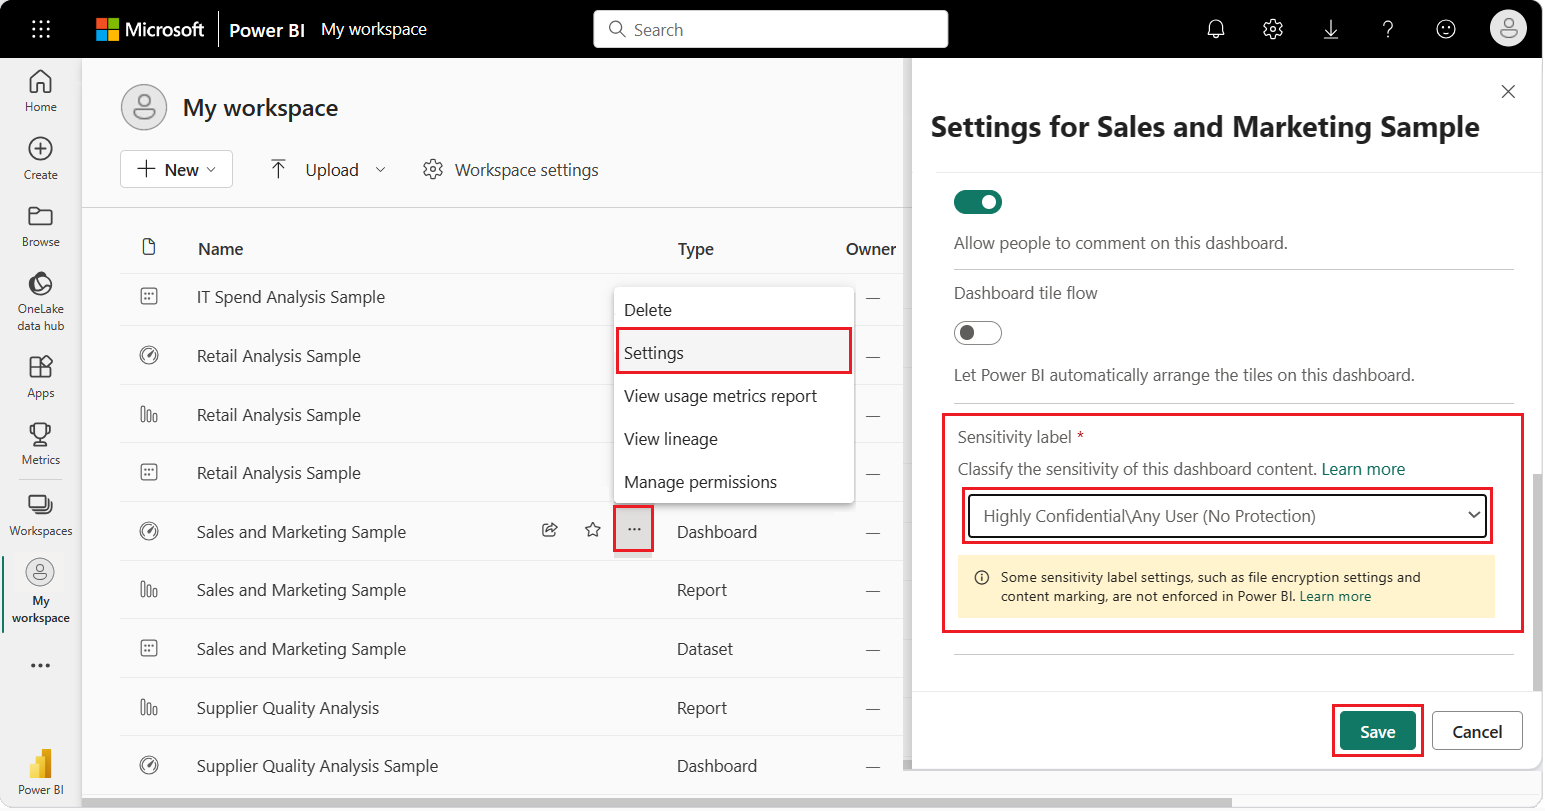 Screenshot that shows how to set the sensitivity label for a dashboard.